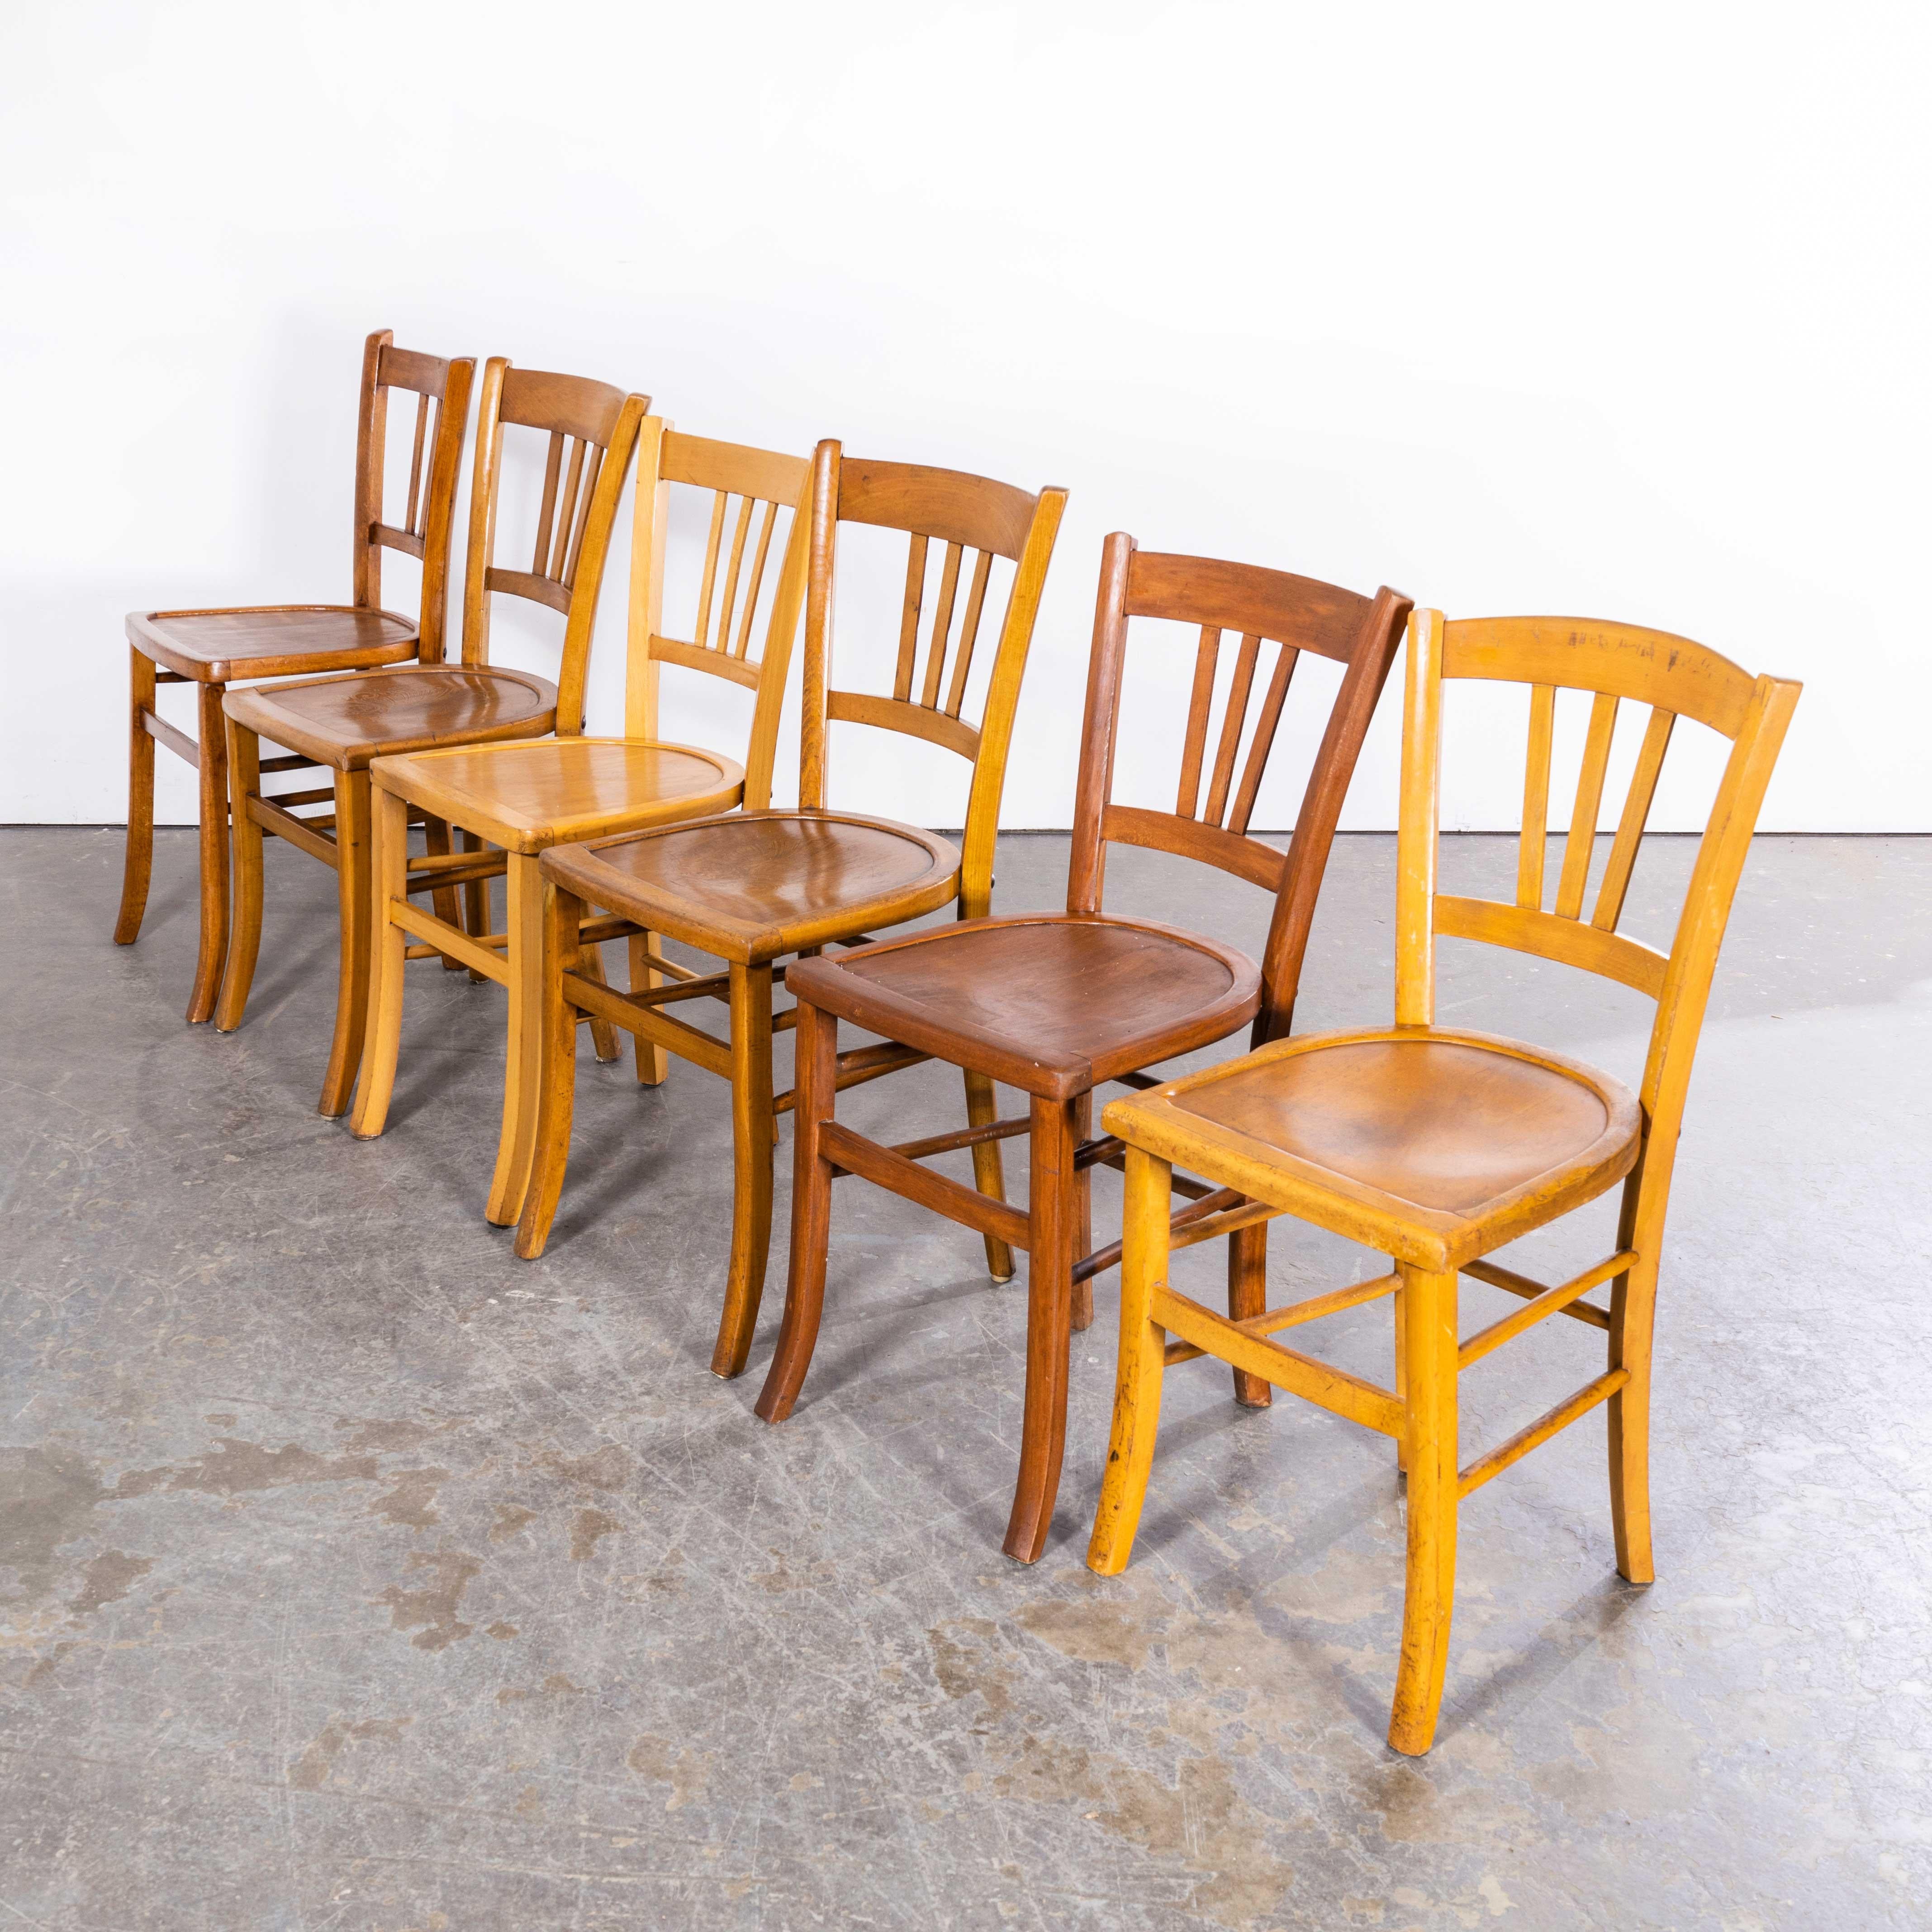 1950’s Standard Blonde Farmhouse French Mixed Dining Chairs - Set Of Six For Sale 2